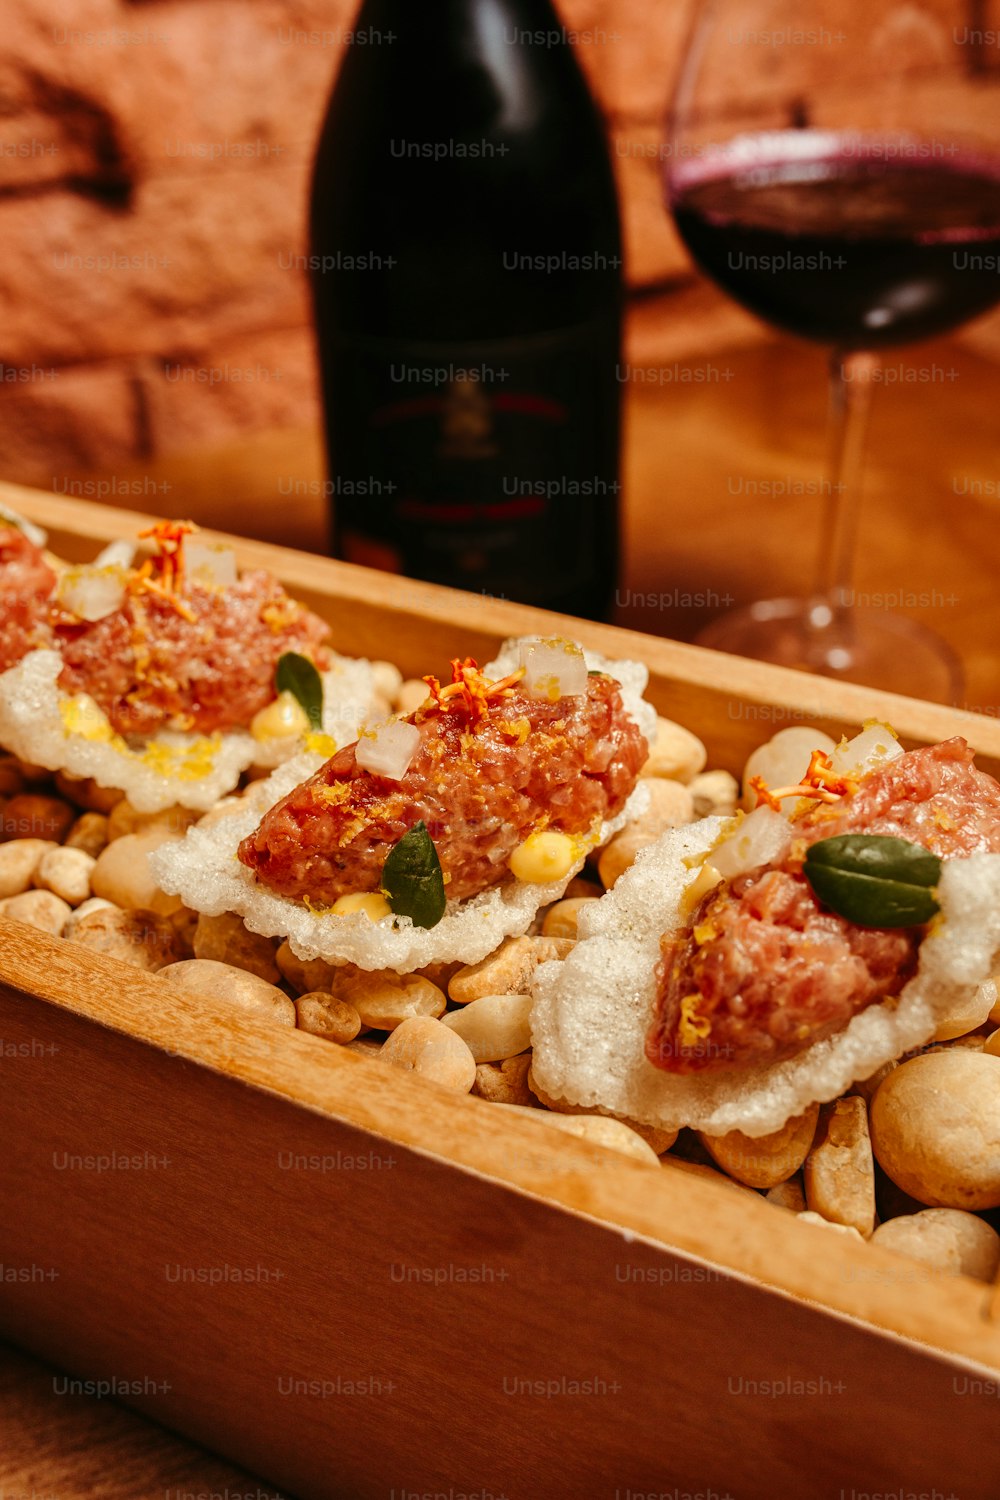 a wooden box filled with food next to a glass of wine